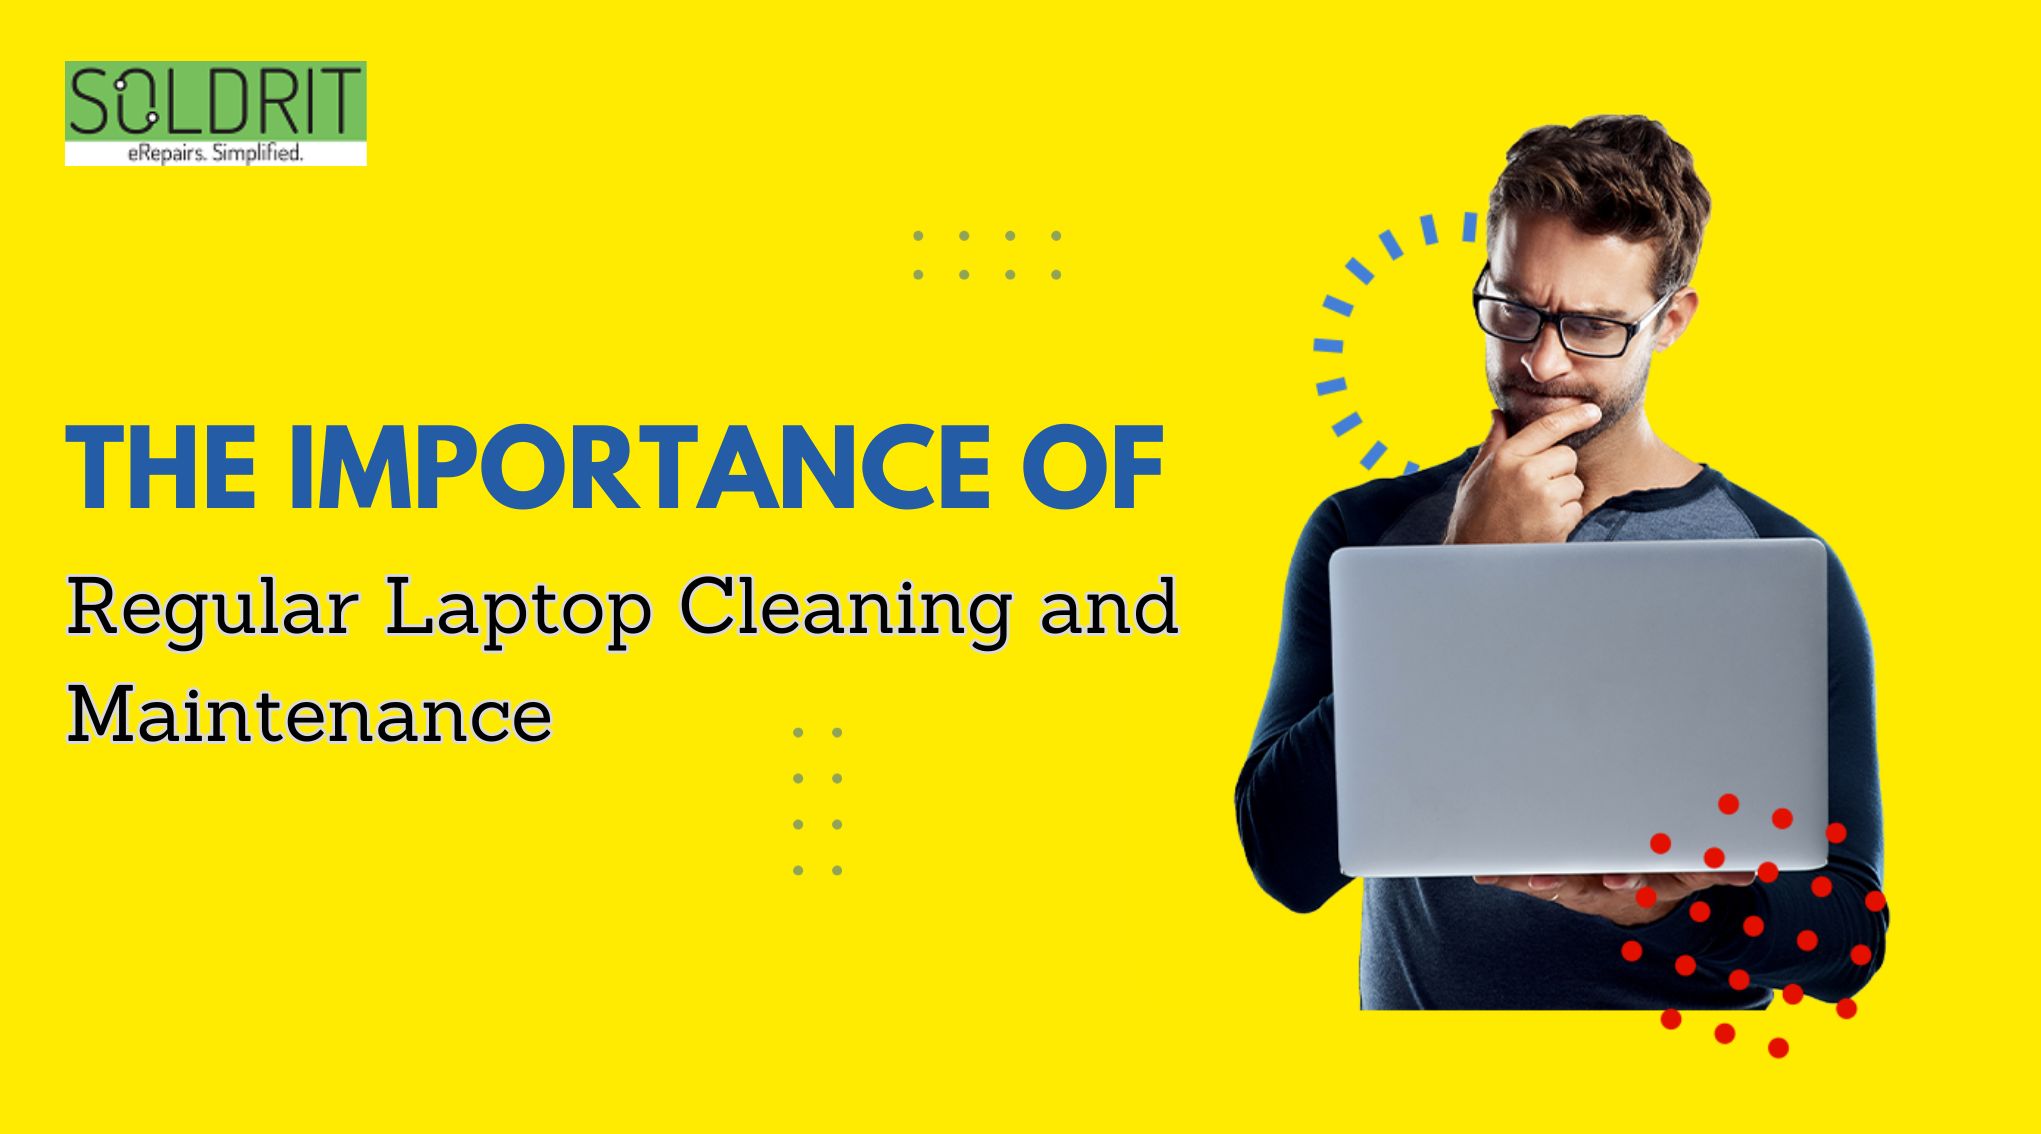 The Importance of Regular Laptop Cleaning and Maintenance